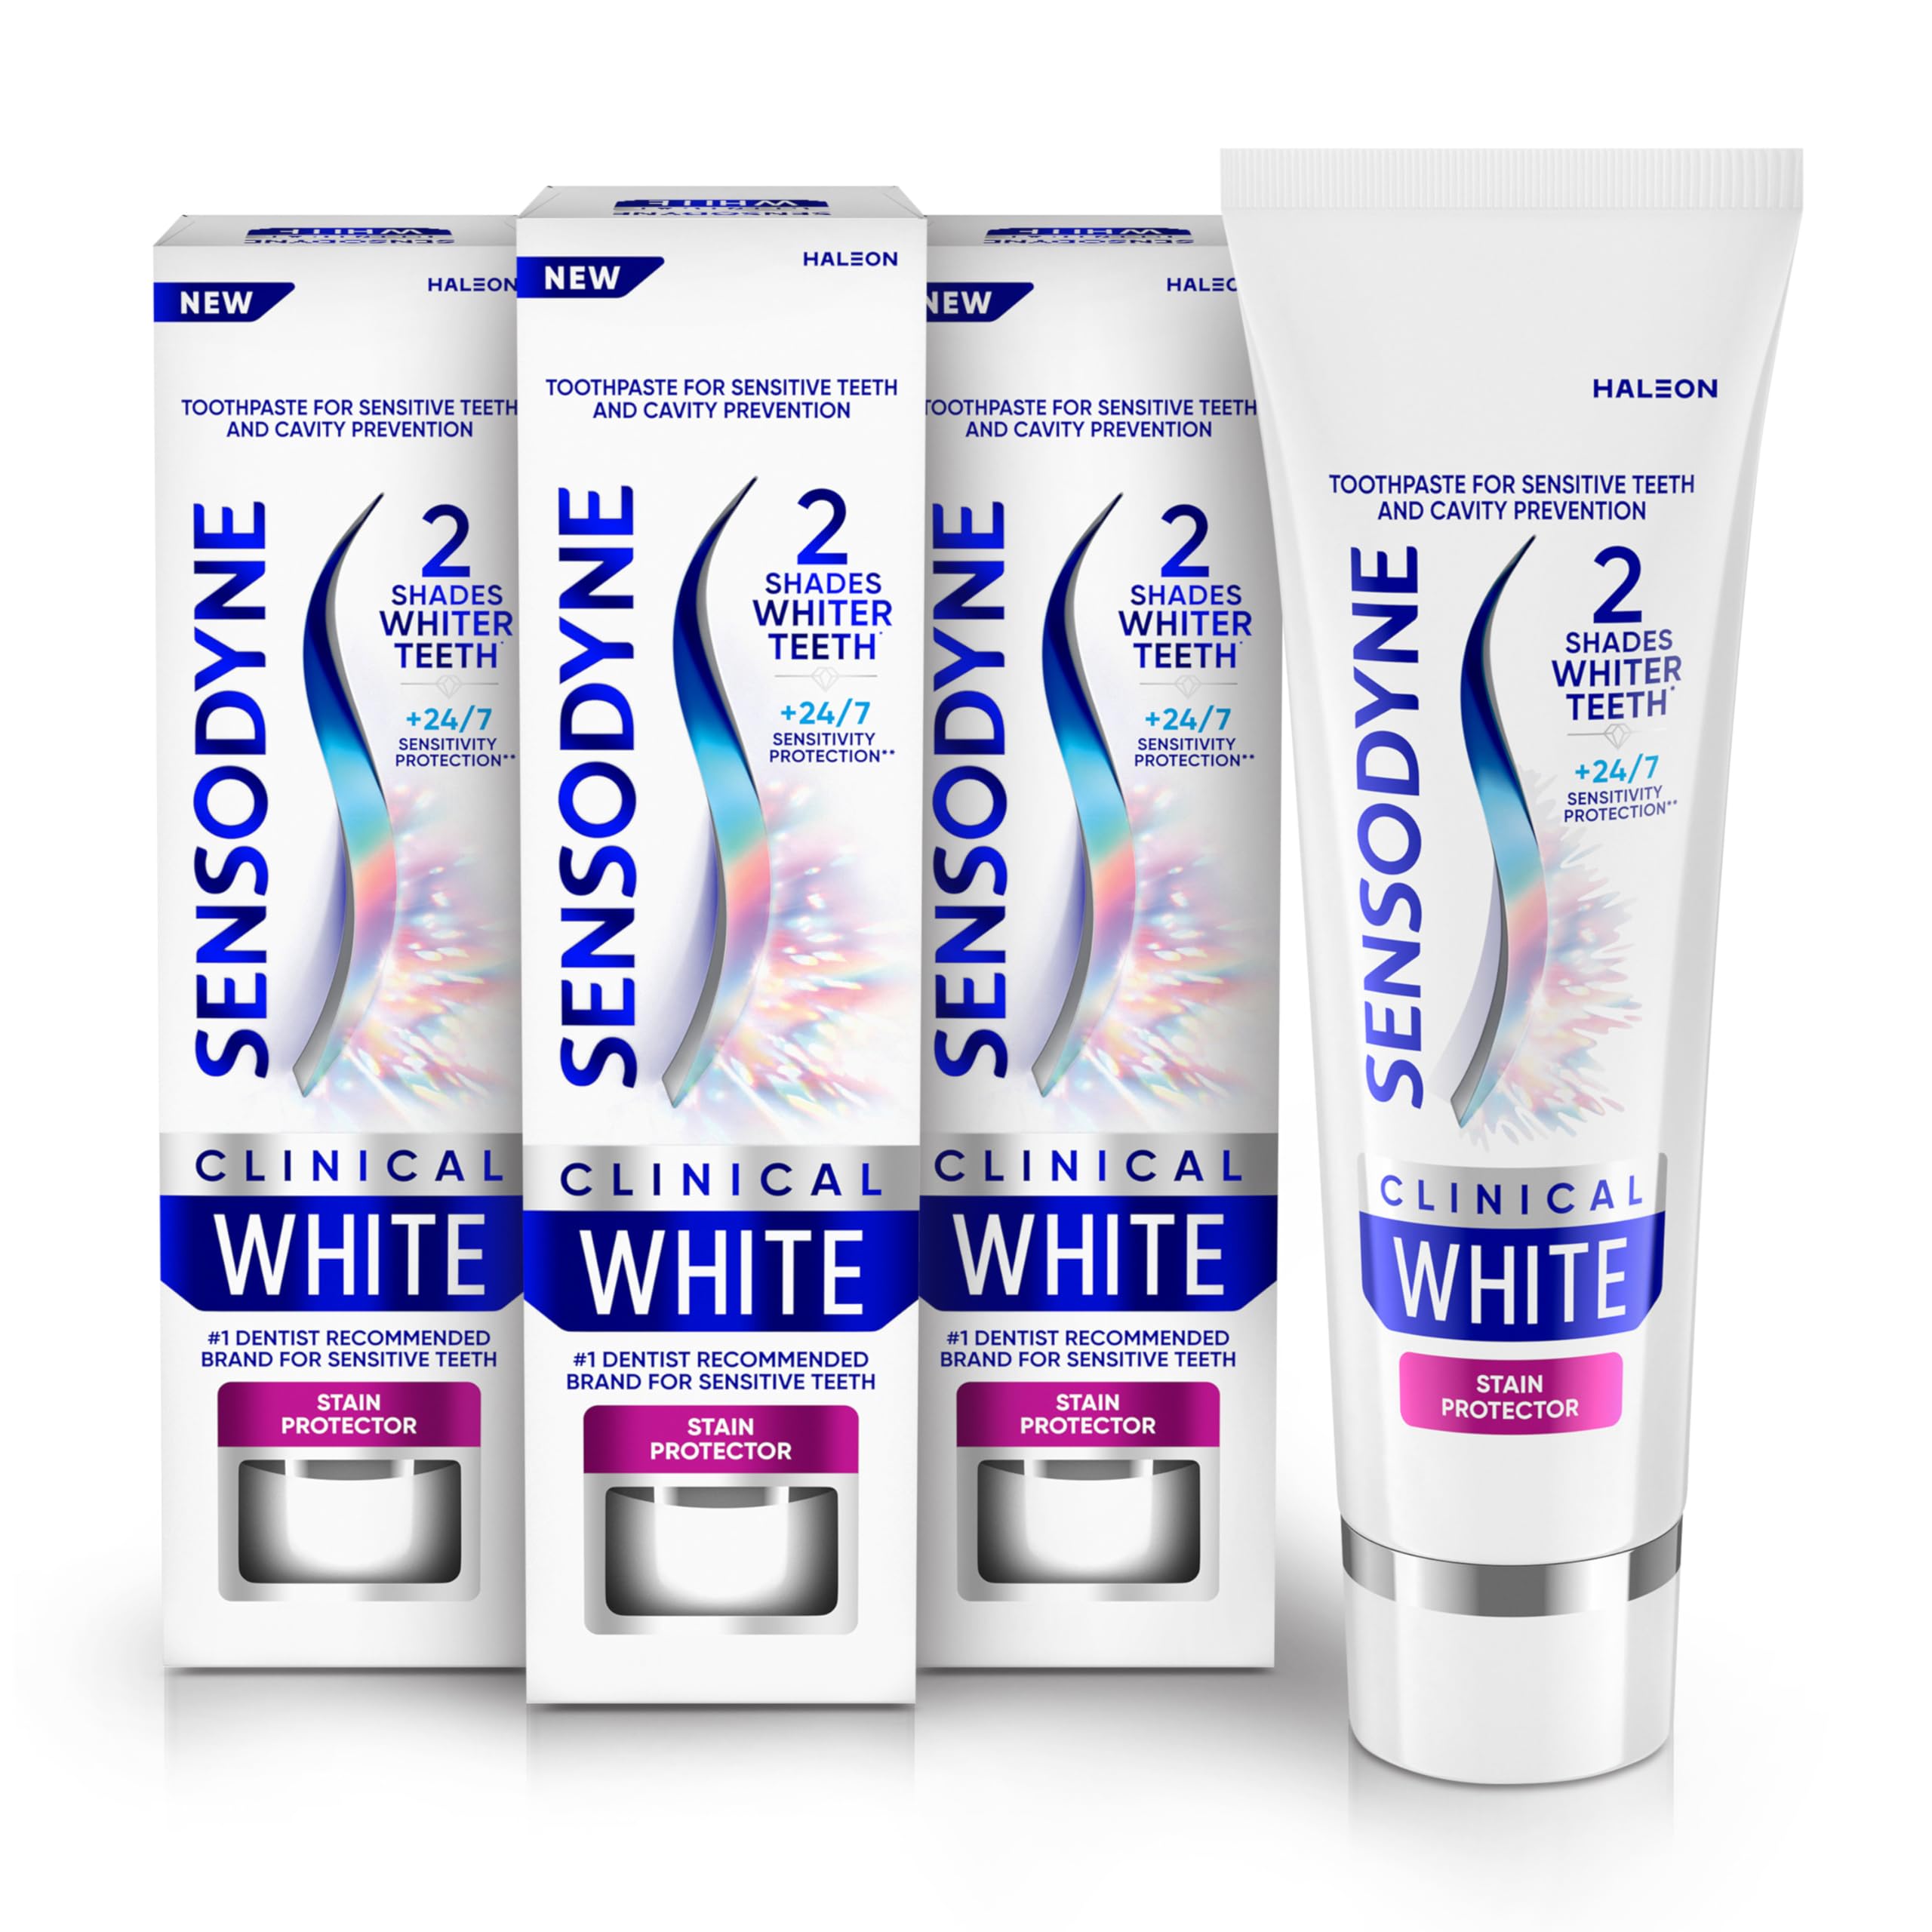 Sensodyne Clinical White Toothpaste Clinically Proven Whitening for Sensitive Teeth, Stain Protector, 3.4 oz x 3